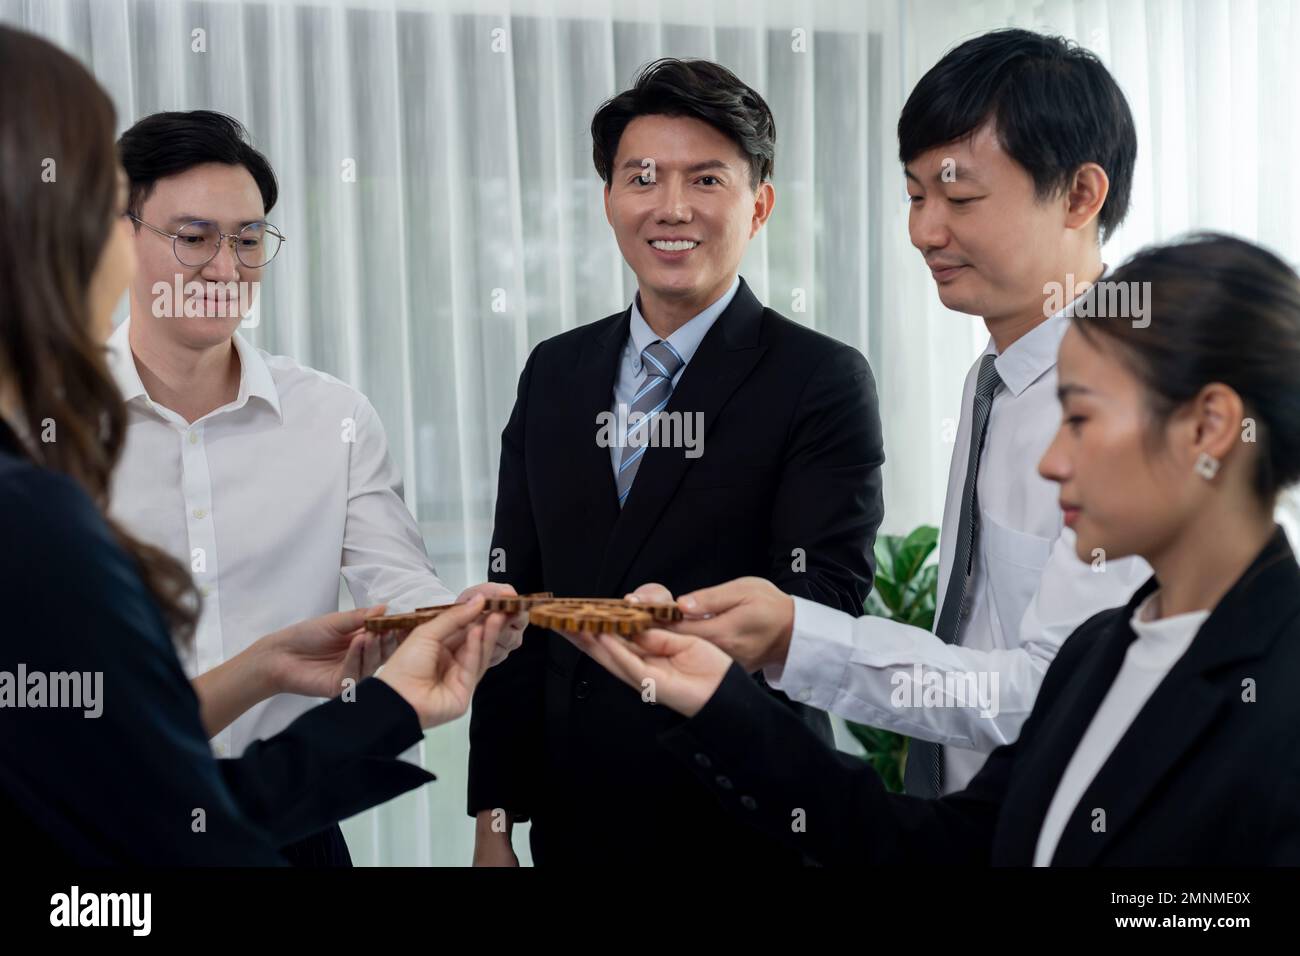 Closeup hand holding wooden gear by businesspeople wearing suit for harmony synergy in office workplace concept. Group of people hand making chain of Stock Photo